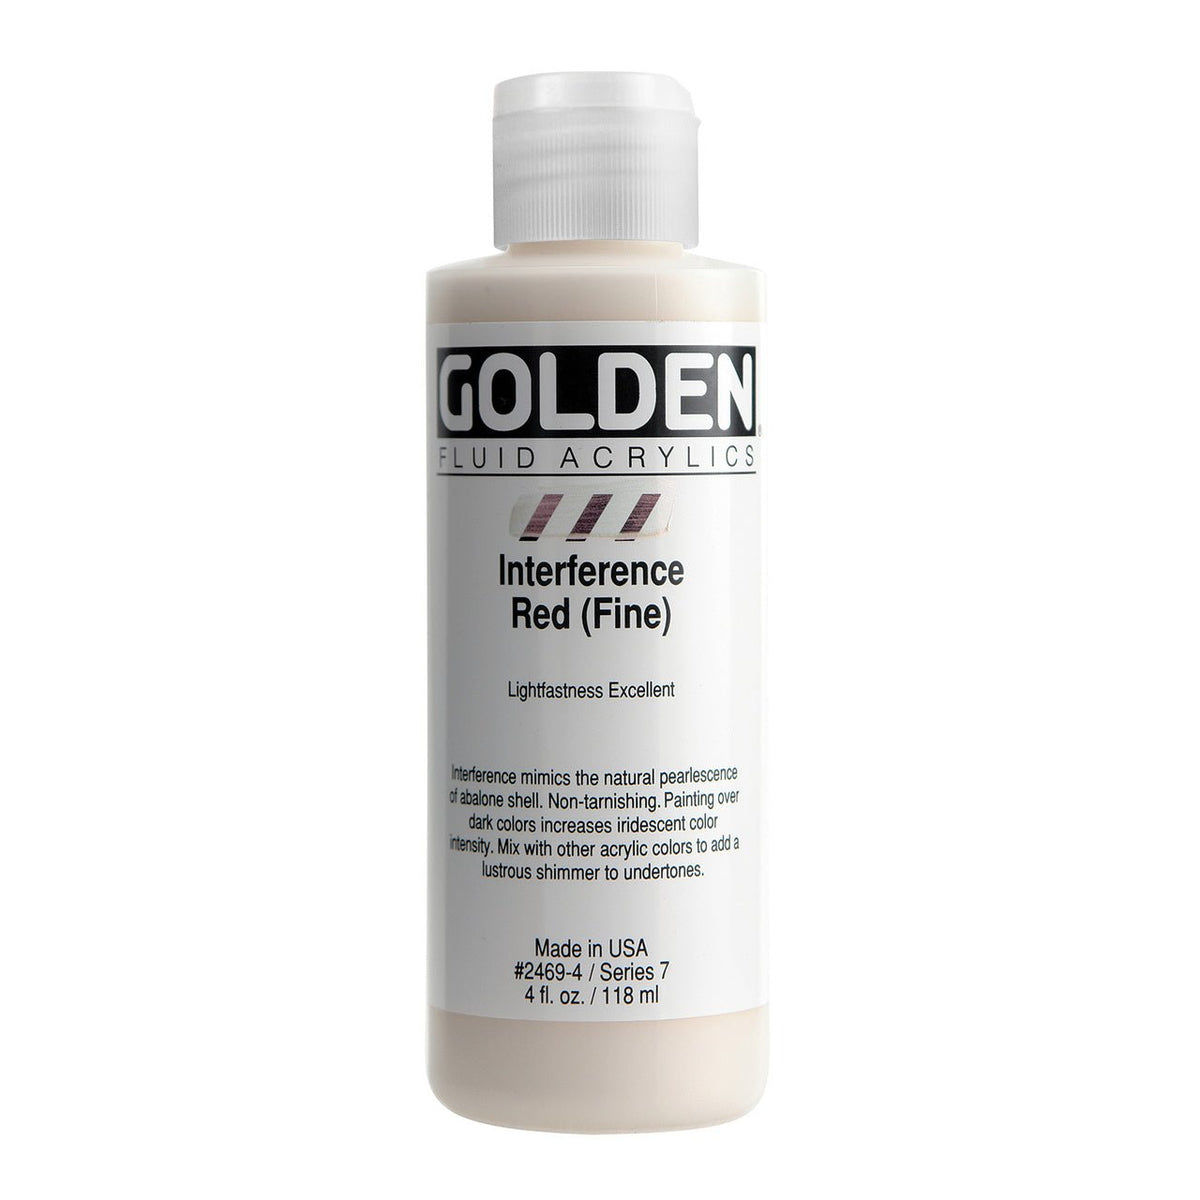 Golden Fluid Acrylic Interference Red (fine) 4 oz - merriartist.com